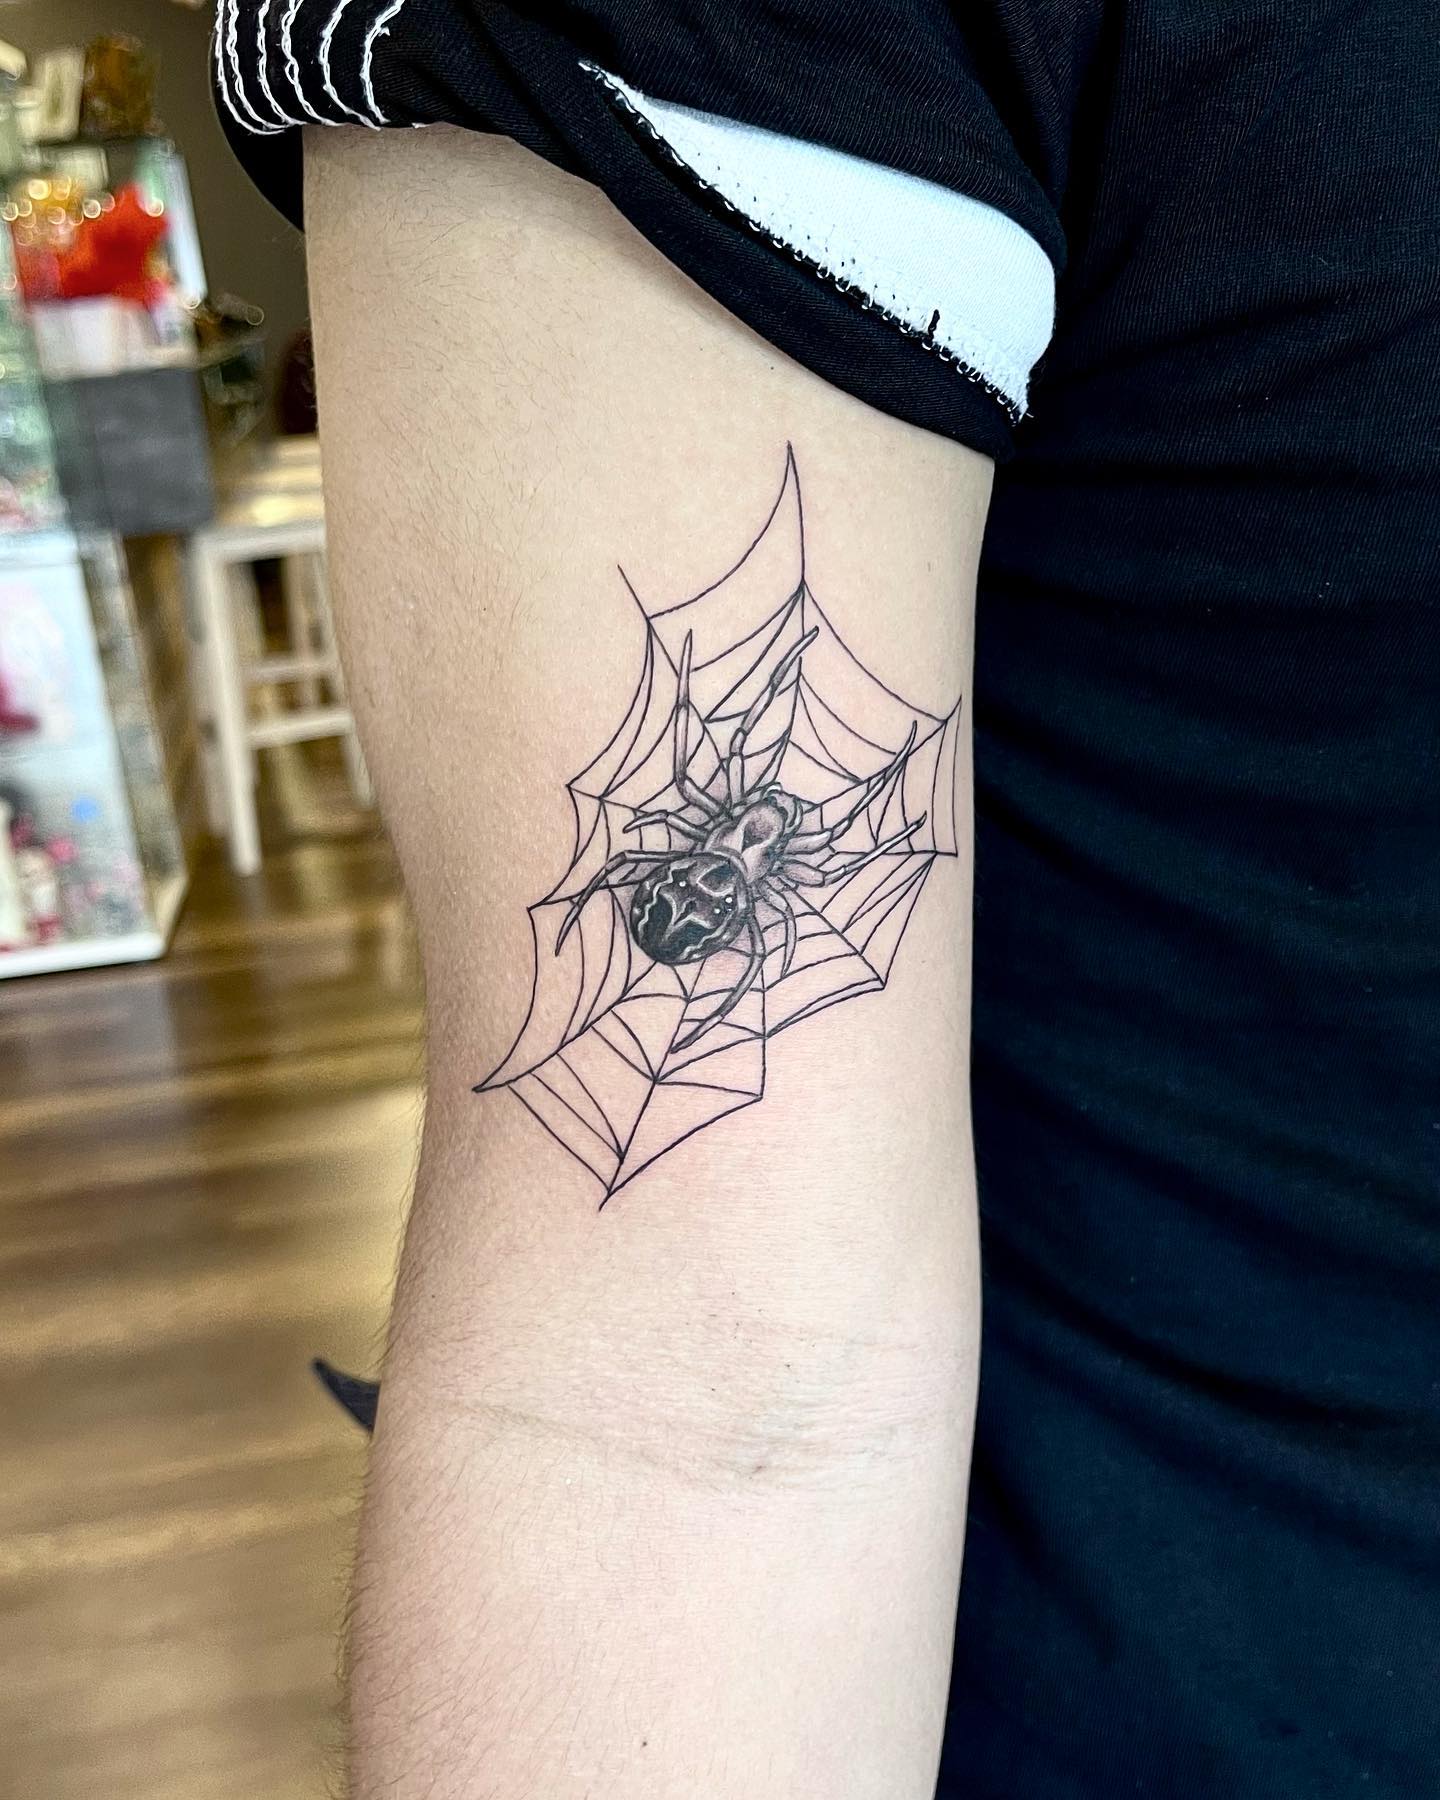 Spiders being stuck in a web will look mysterious and scary. Guys who want a tattoo that represents their biggest fears will like this all-black ink tattoo idea.